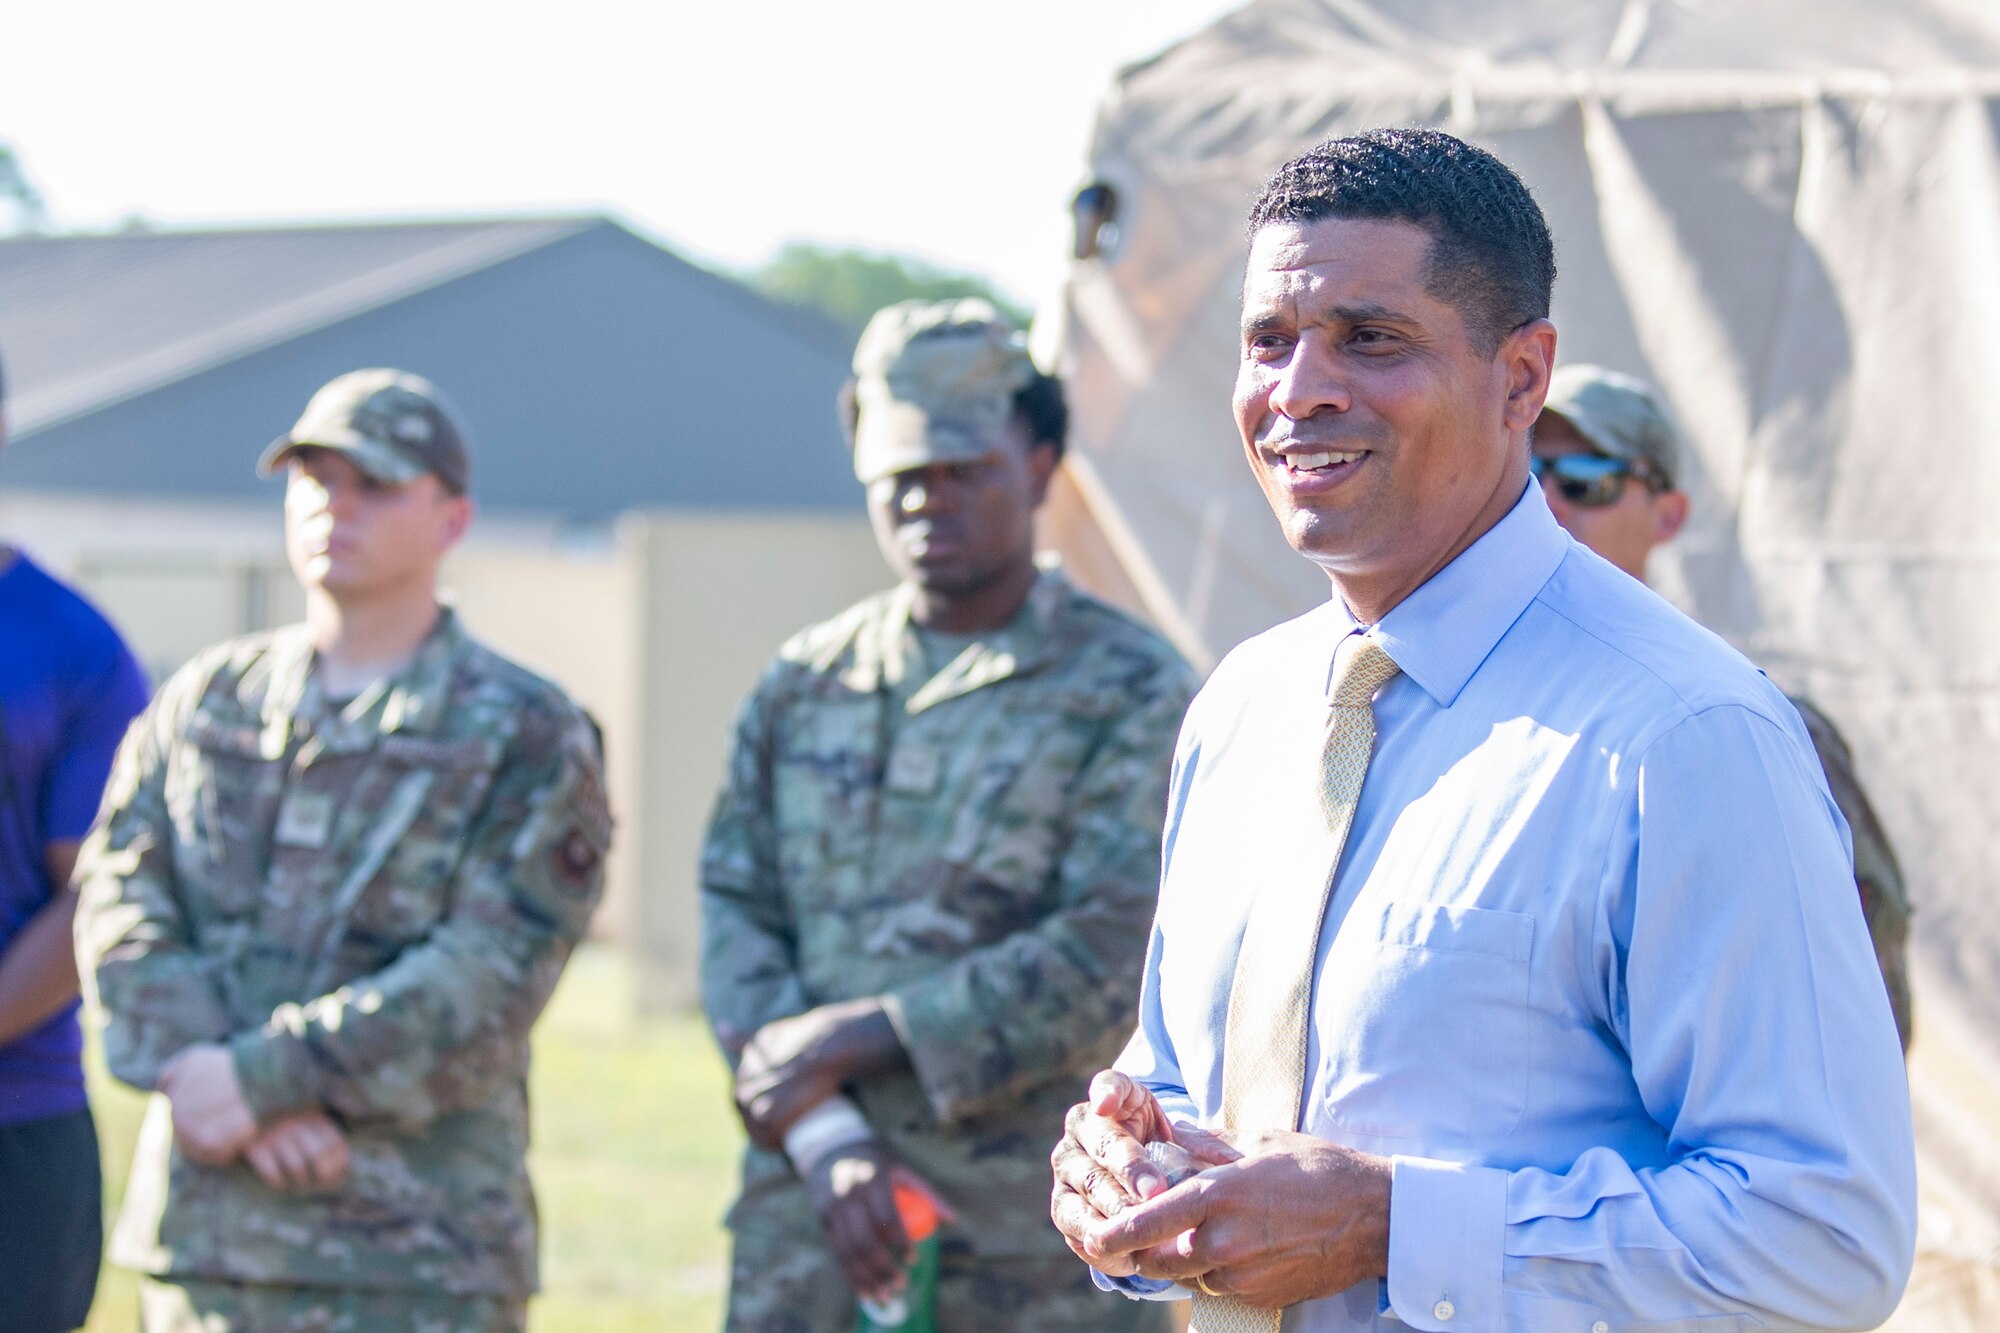 Mr. Marcus Chambers, Superintendent of Okaloosa County Schools, delivers a speech to the Fort Walton Beach High School Vikings football team during Air Commando Youth Athletic Camp at Hurlburt Field, Florida, Aug. 2, 2023.